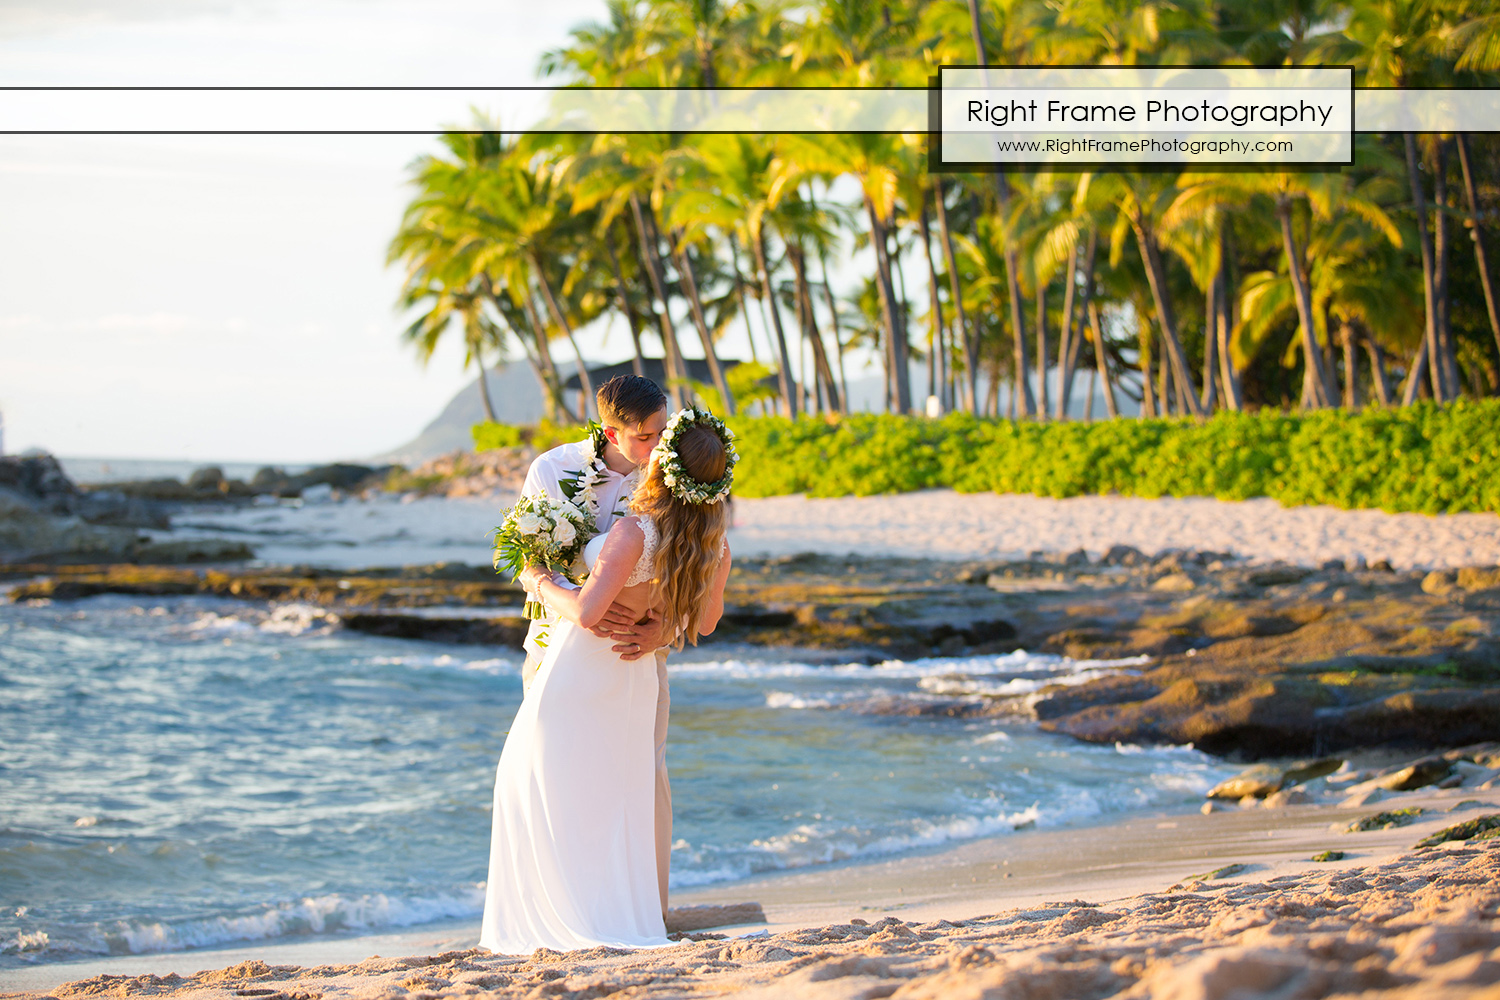 Sunset Wedding At Secret Beach Oahu Hawaii By Right Frame Photography 6577